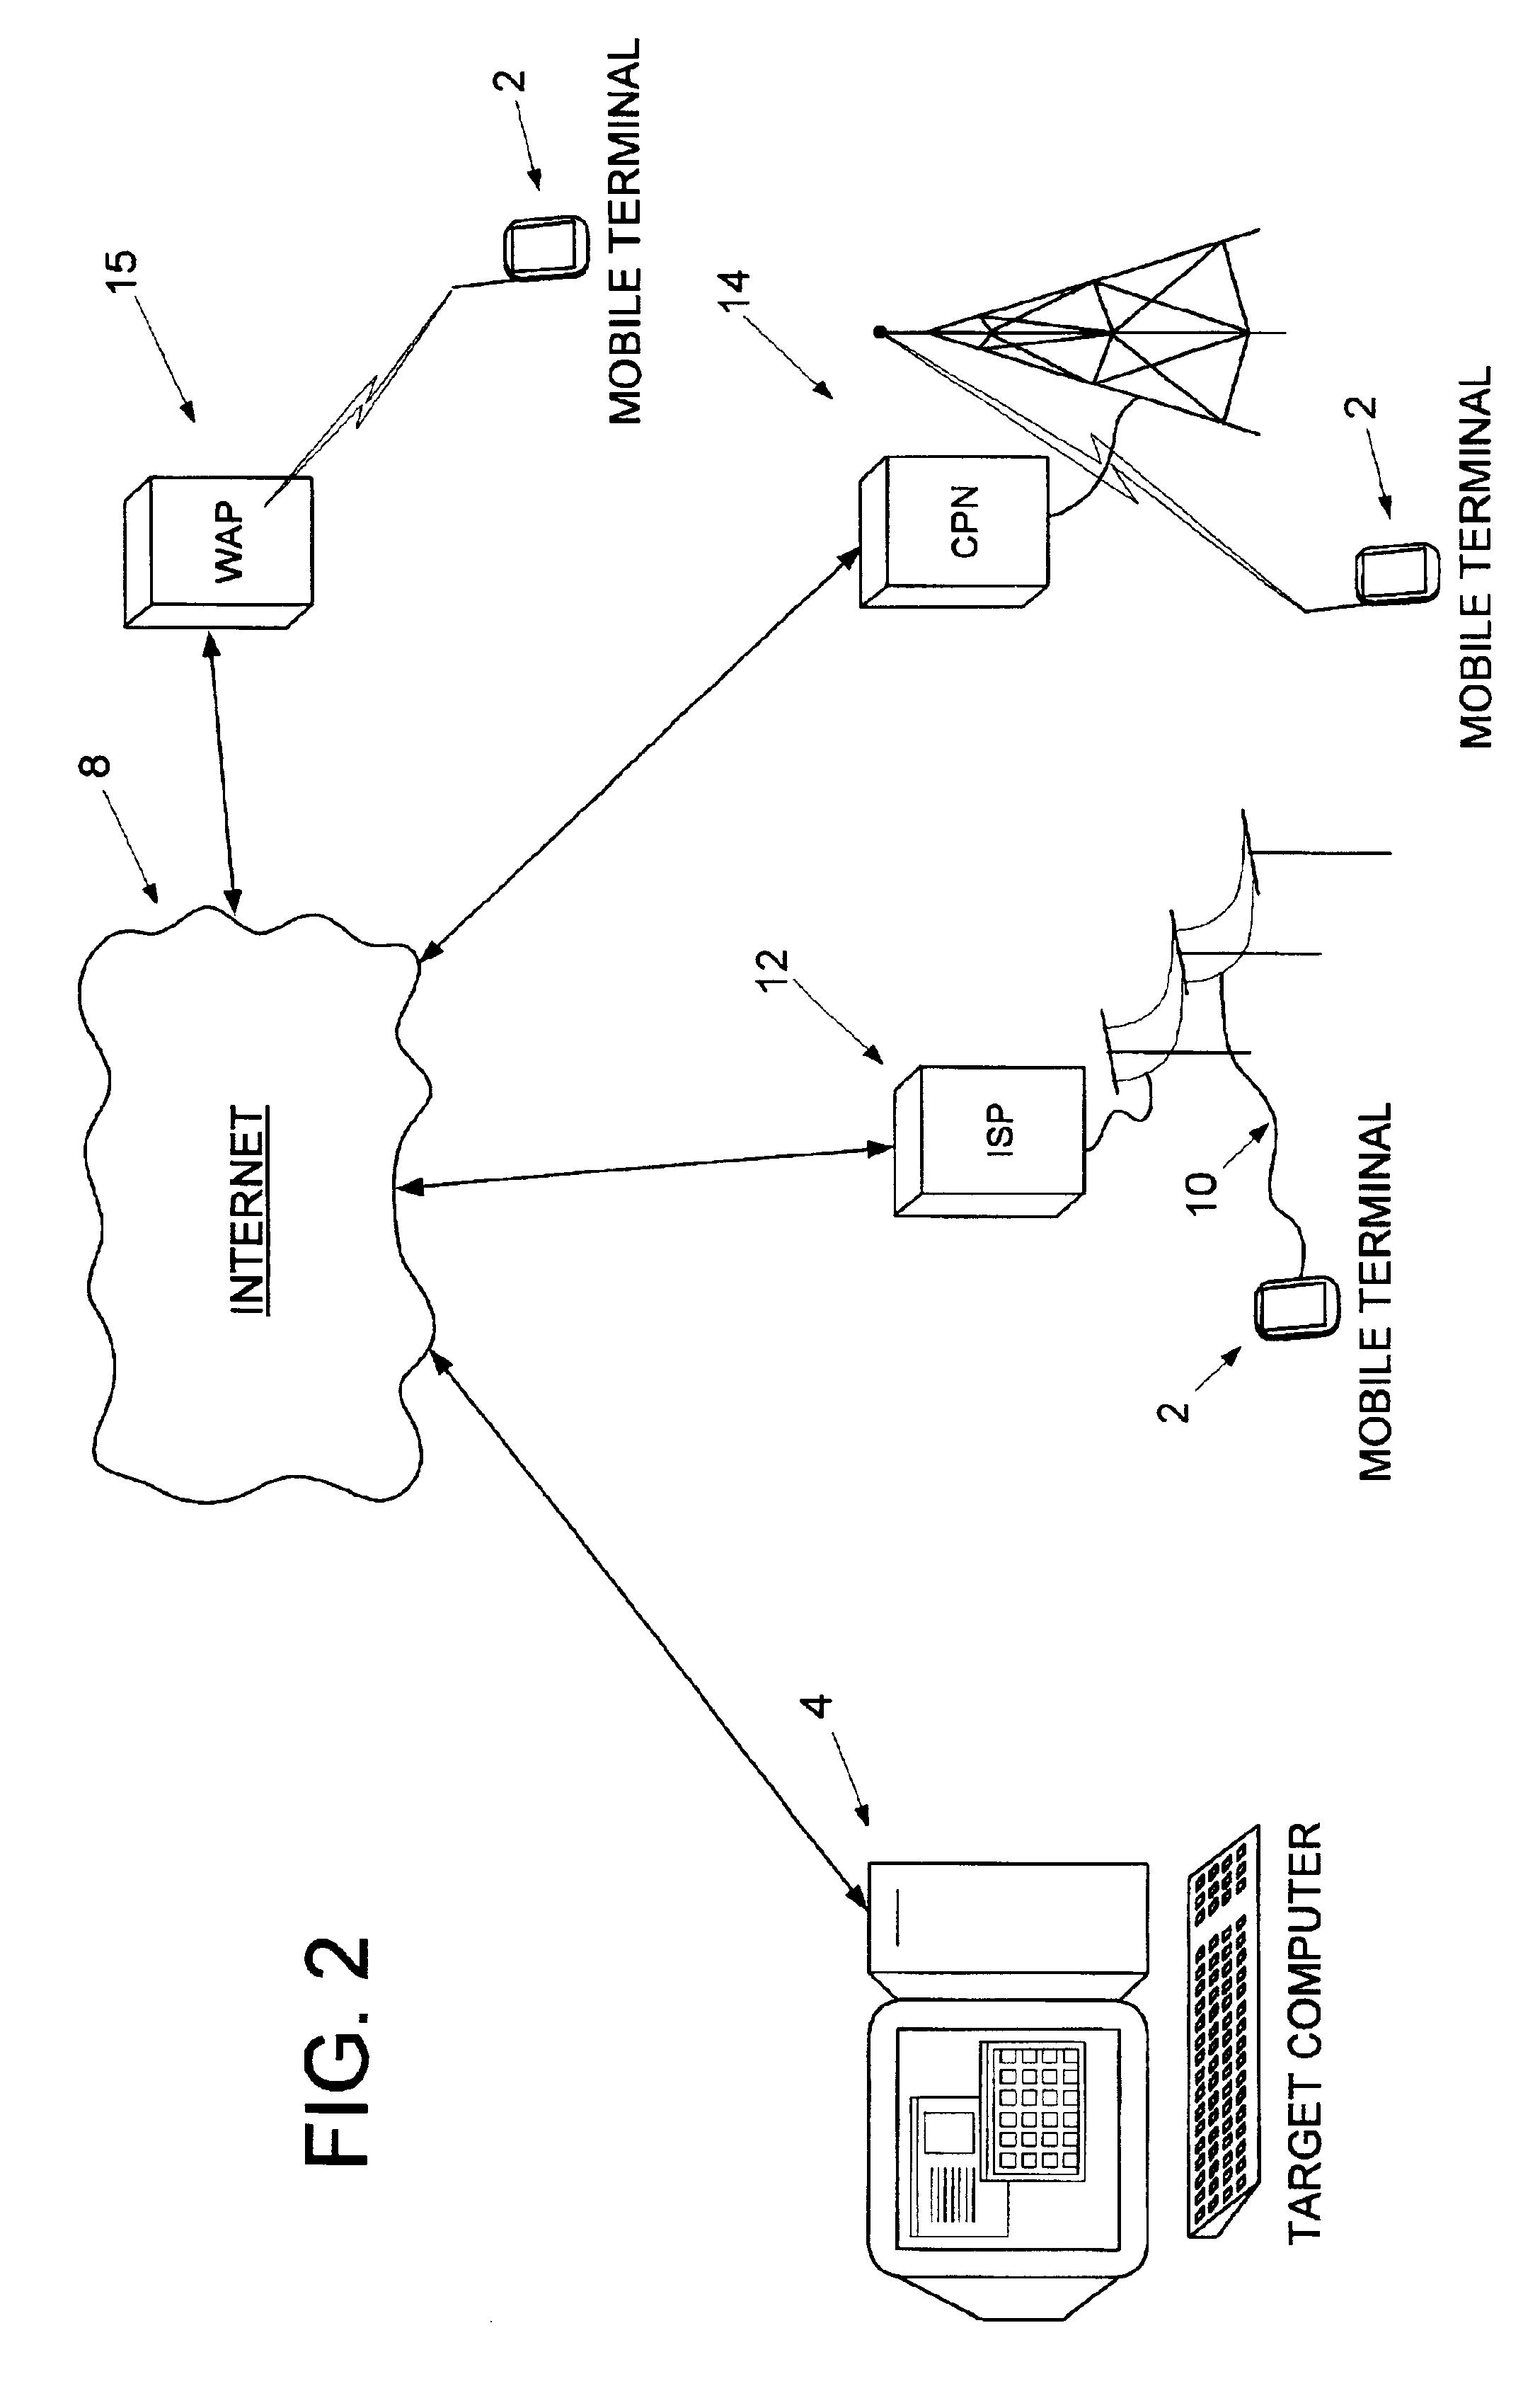 Mobile terminal for displaying a rich text document comprising conditional code for identifying advertising information stored locally or on the internet